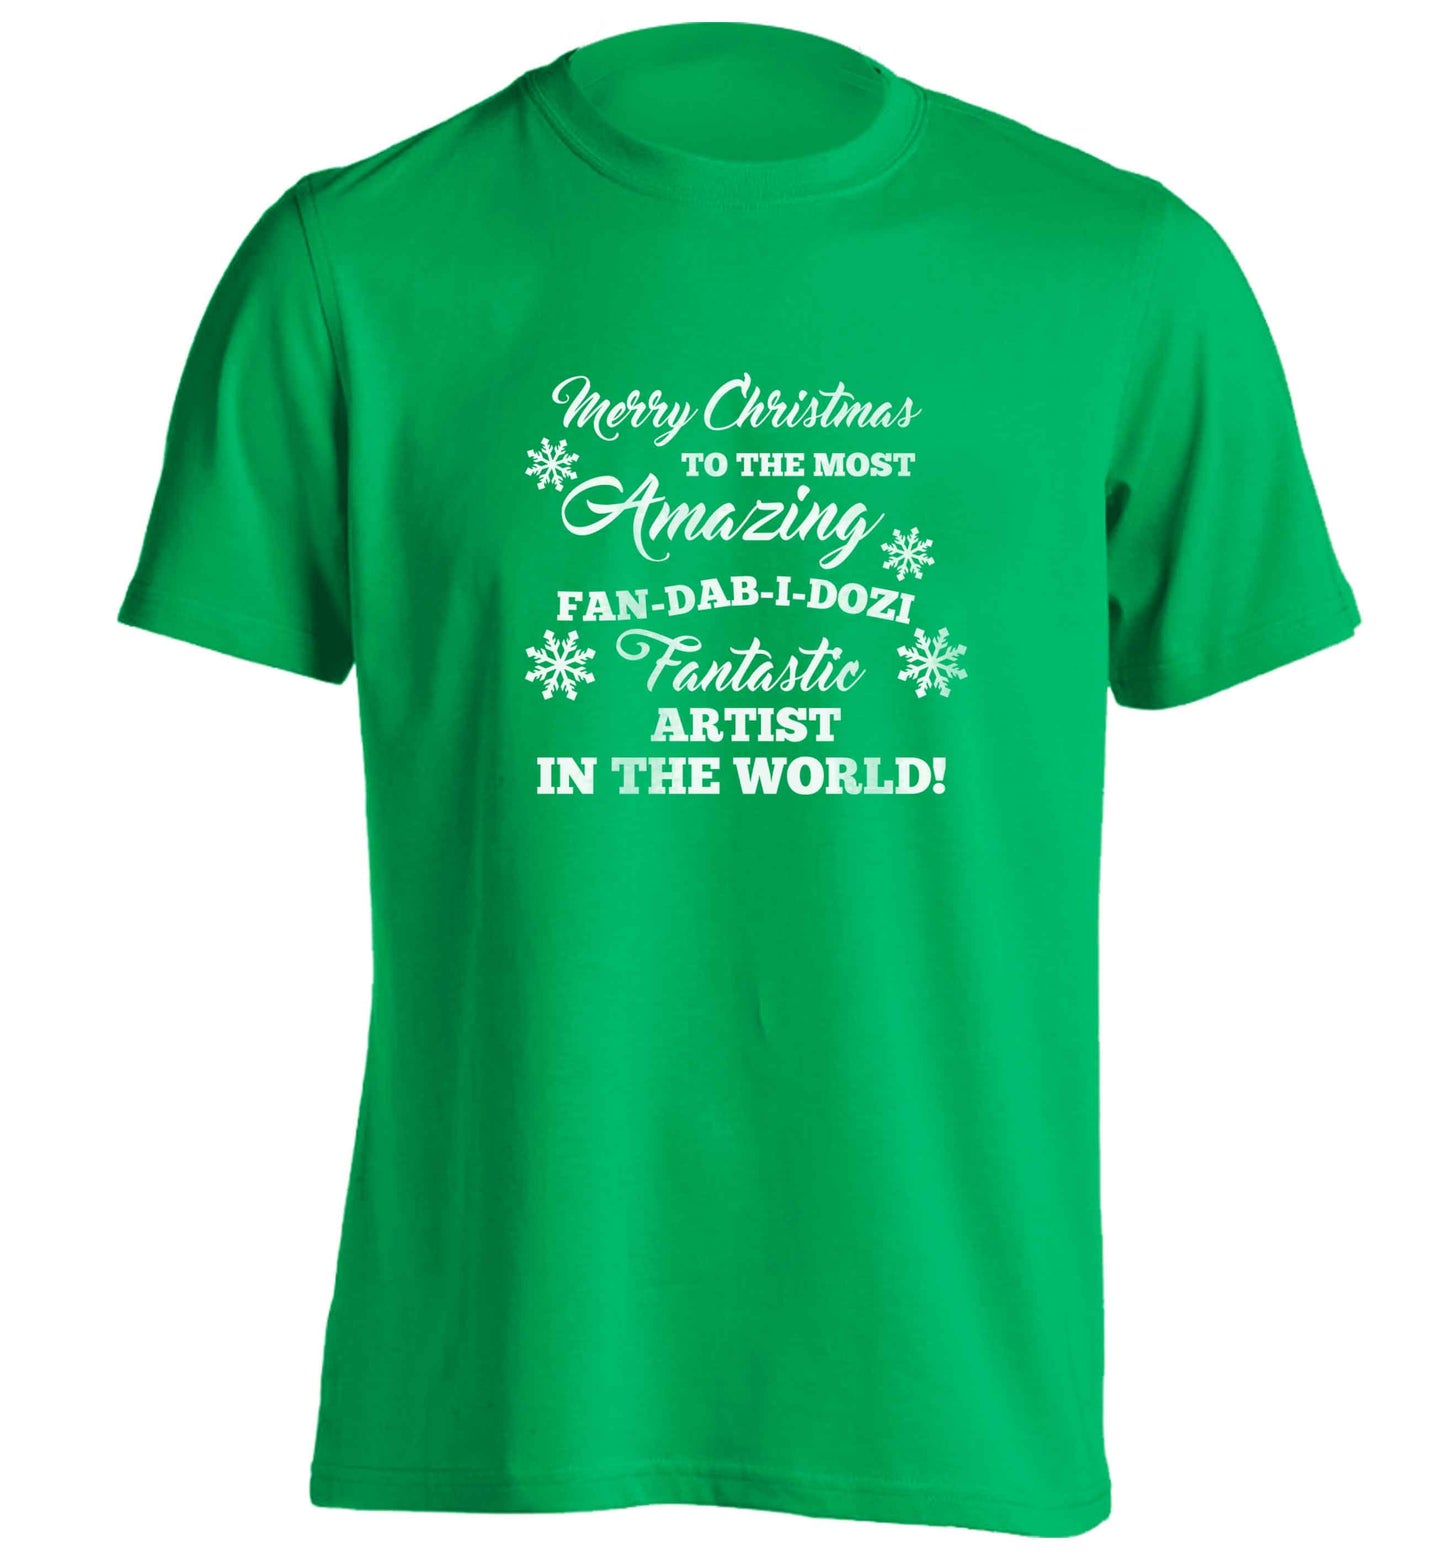 Merry Christmas to the most amazing artist in the world! adults unisex green Tshirt 2XL